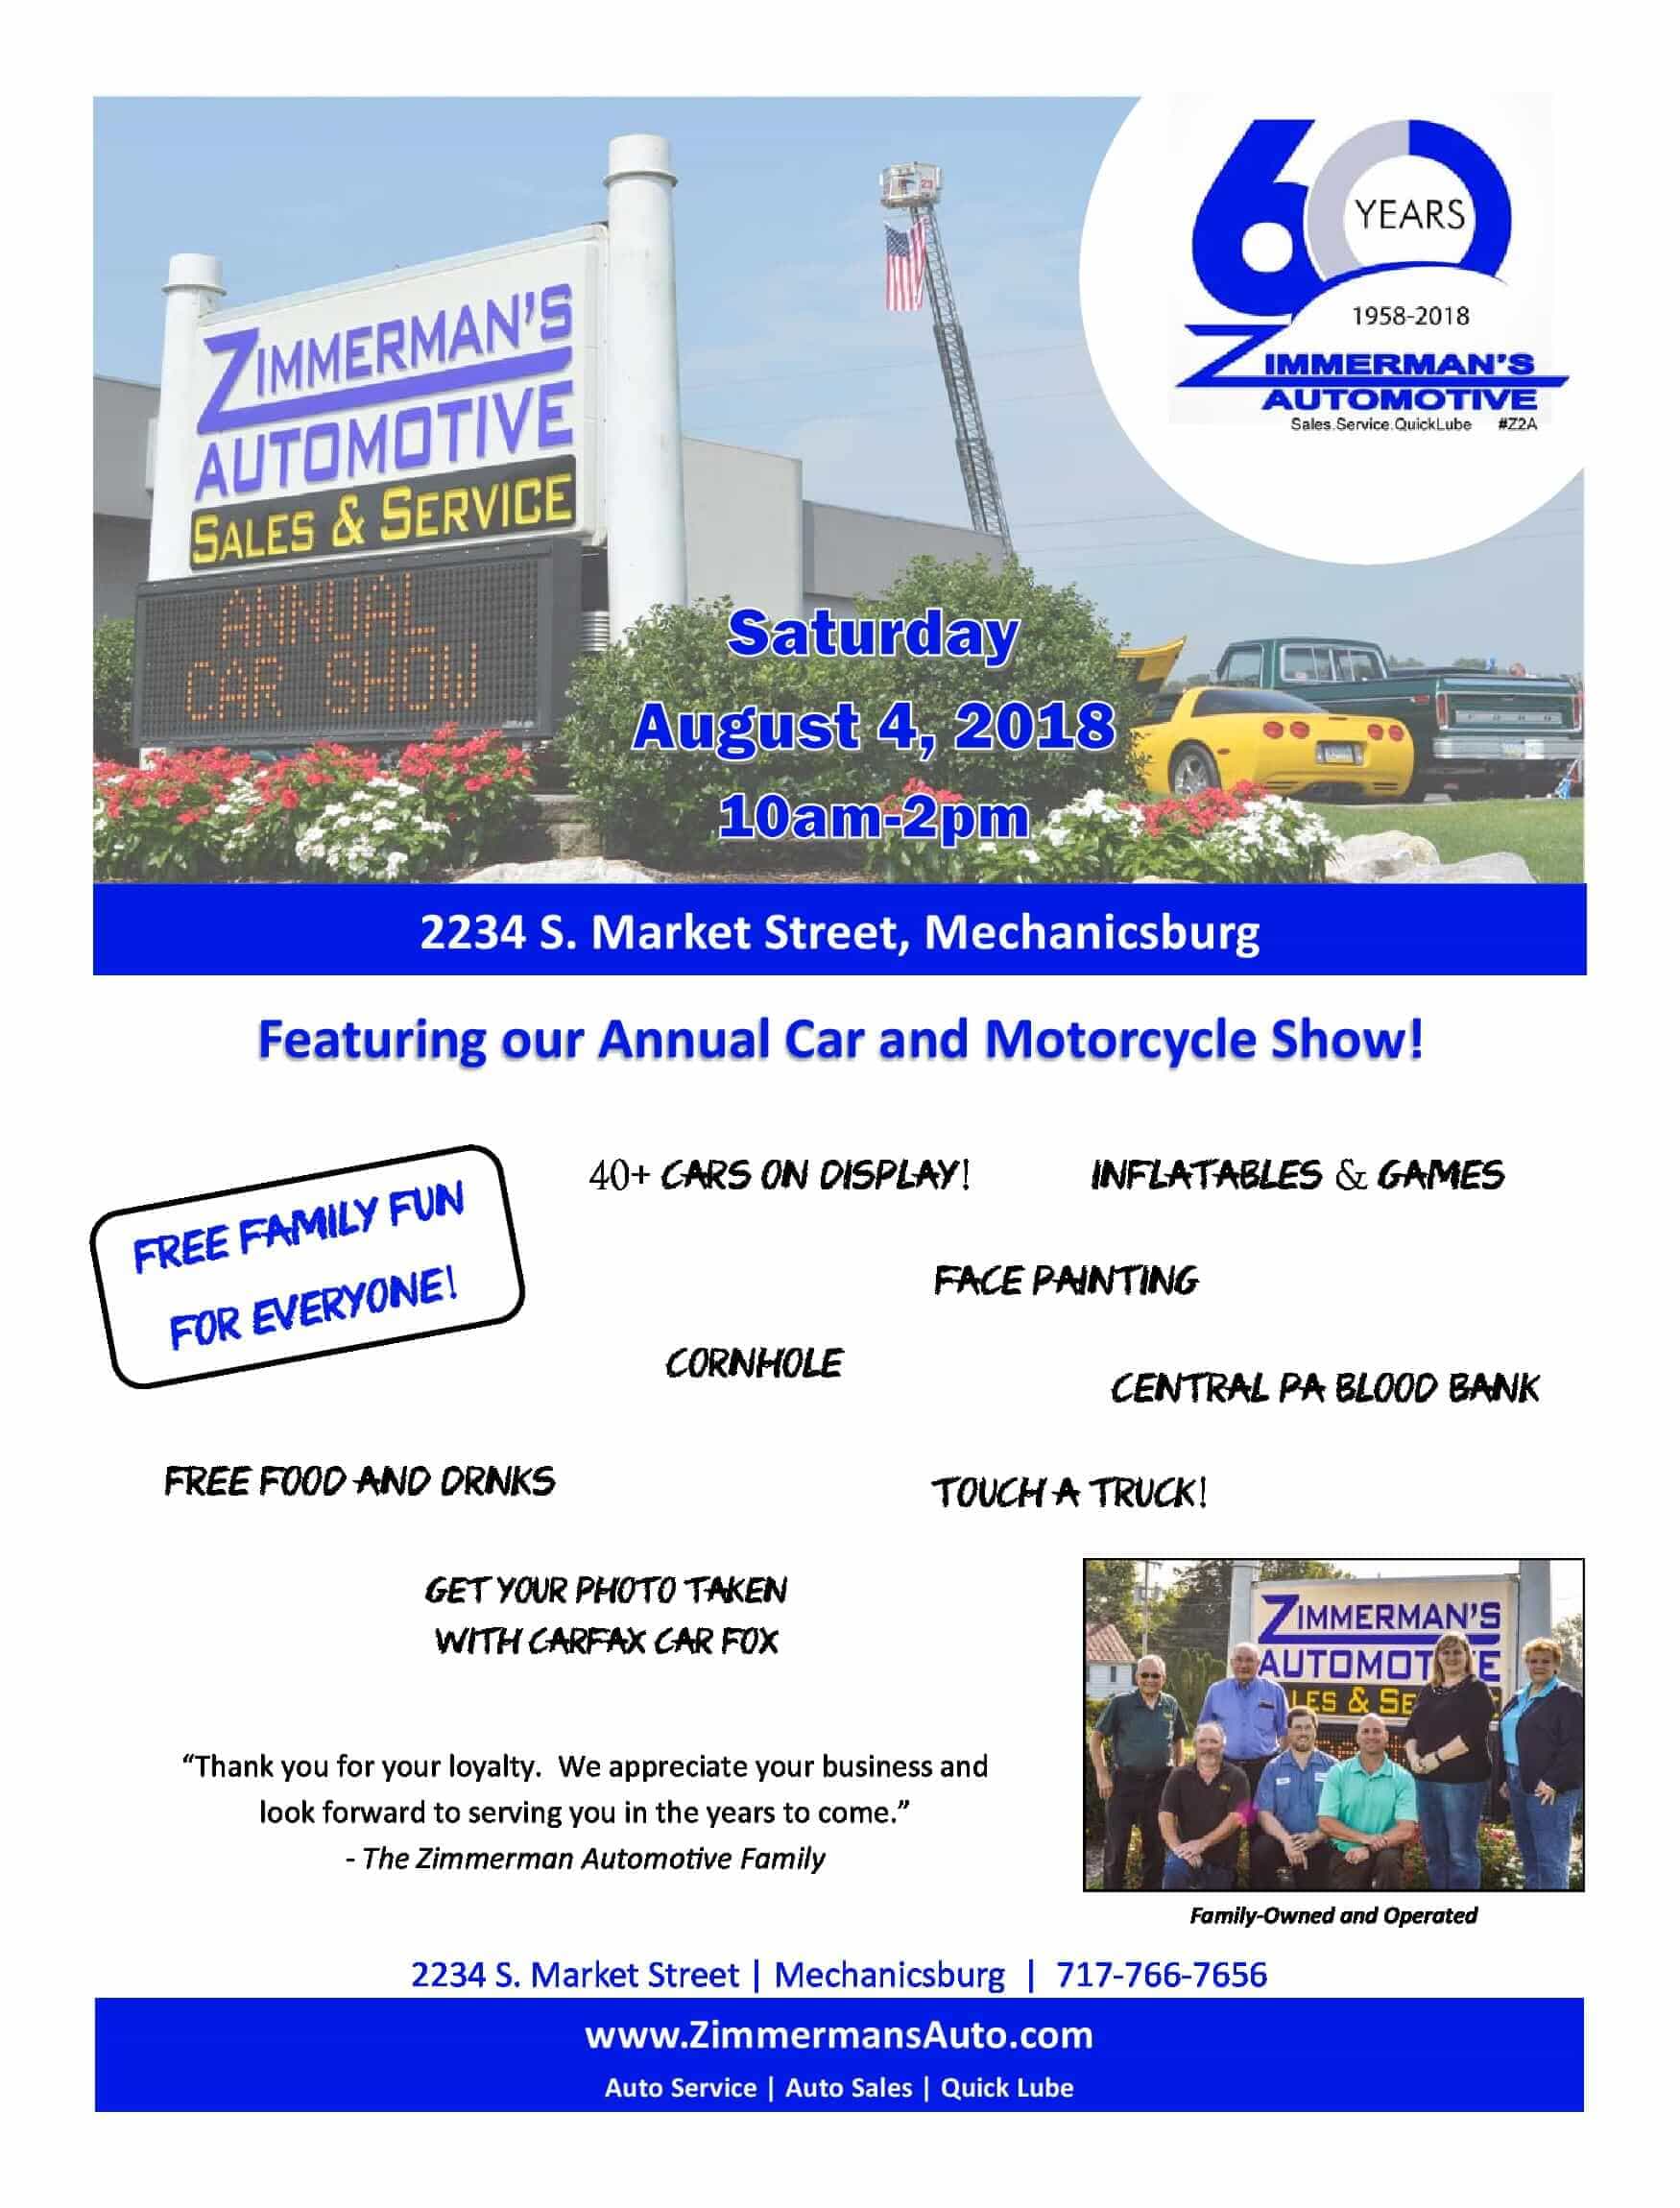 Annual Car and Motorcycle Show